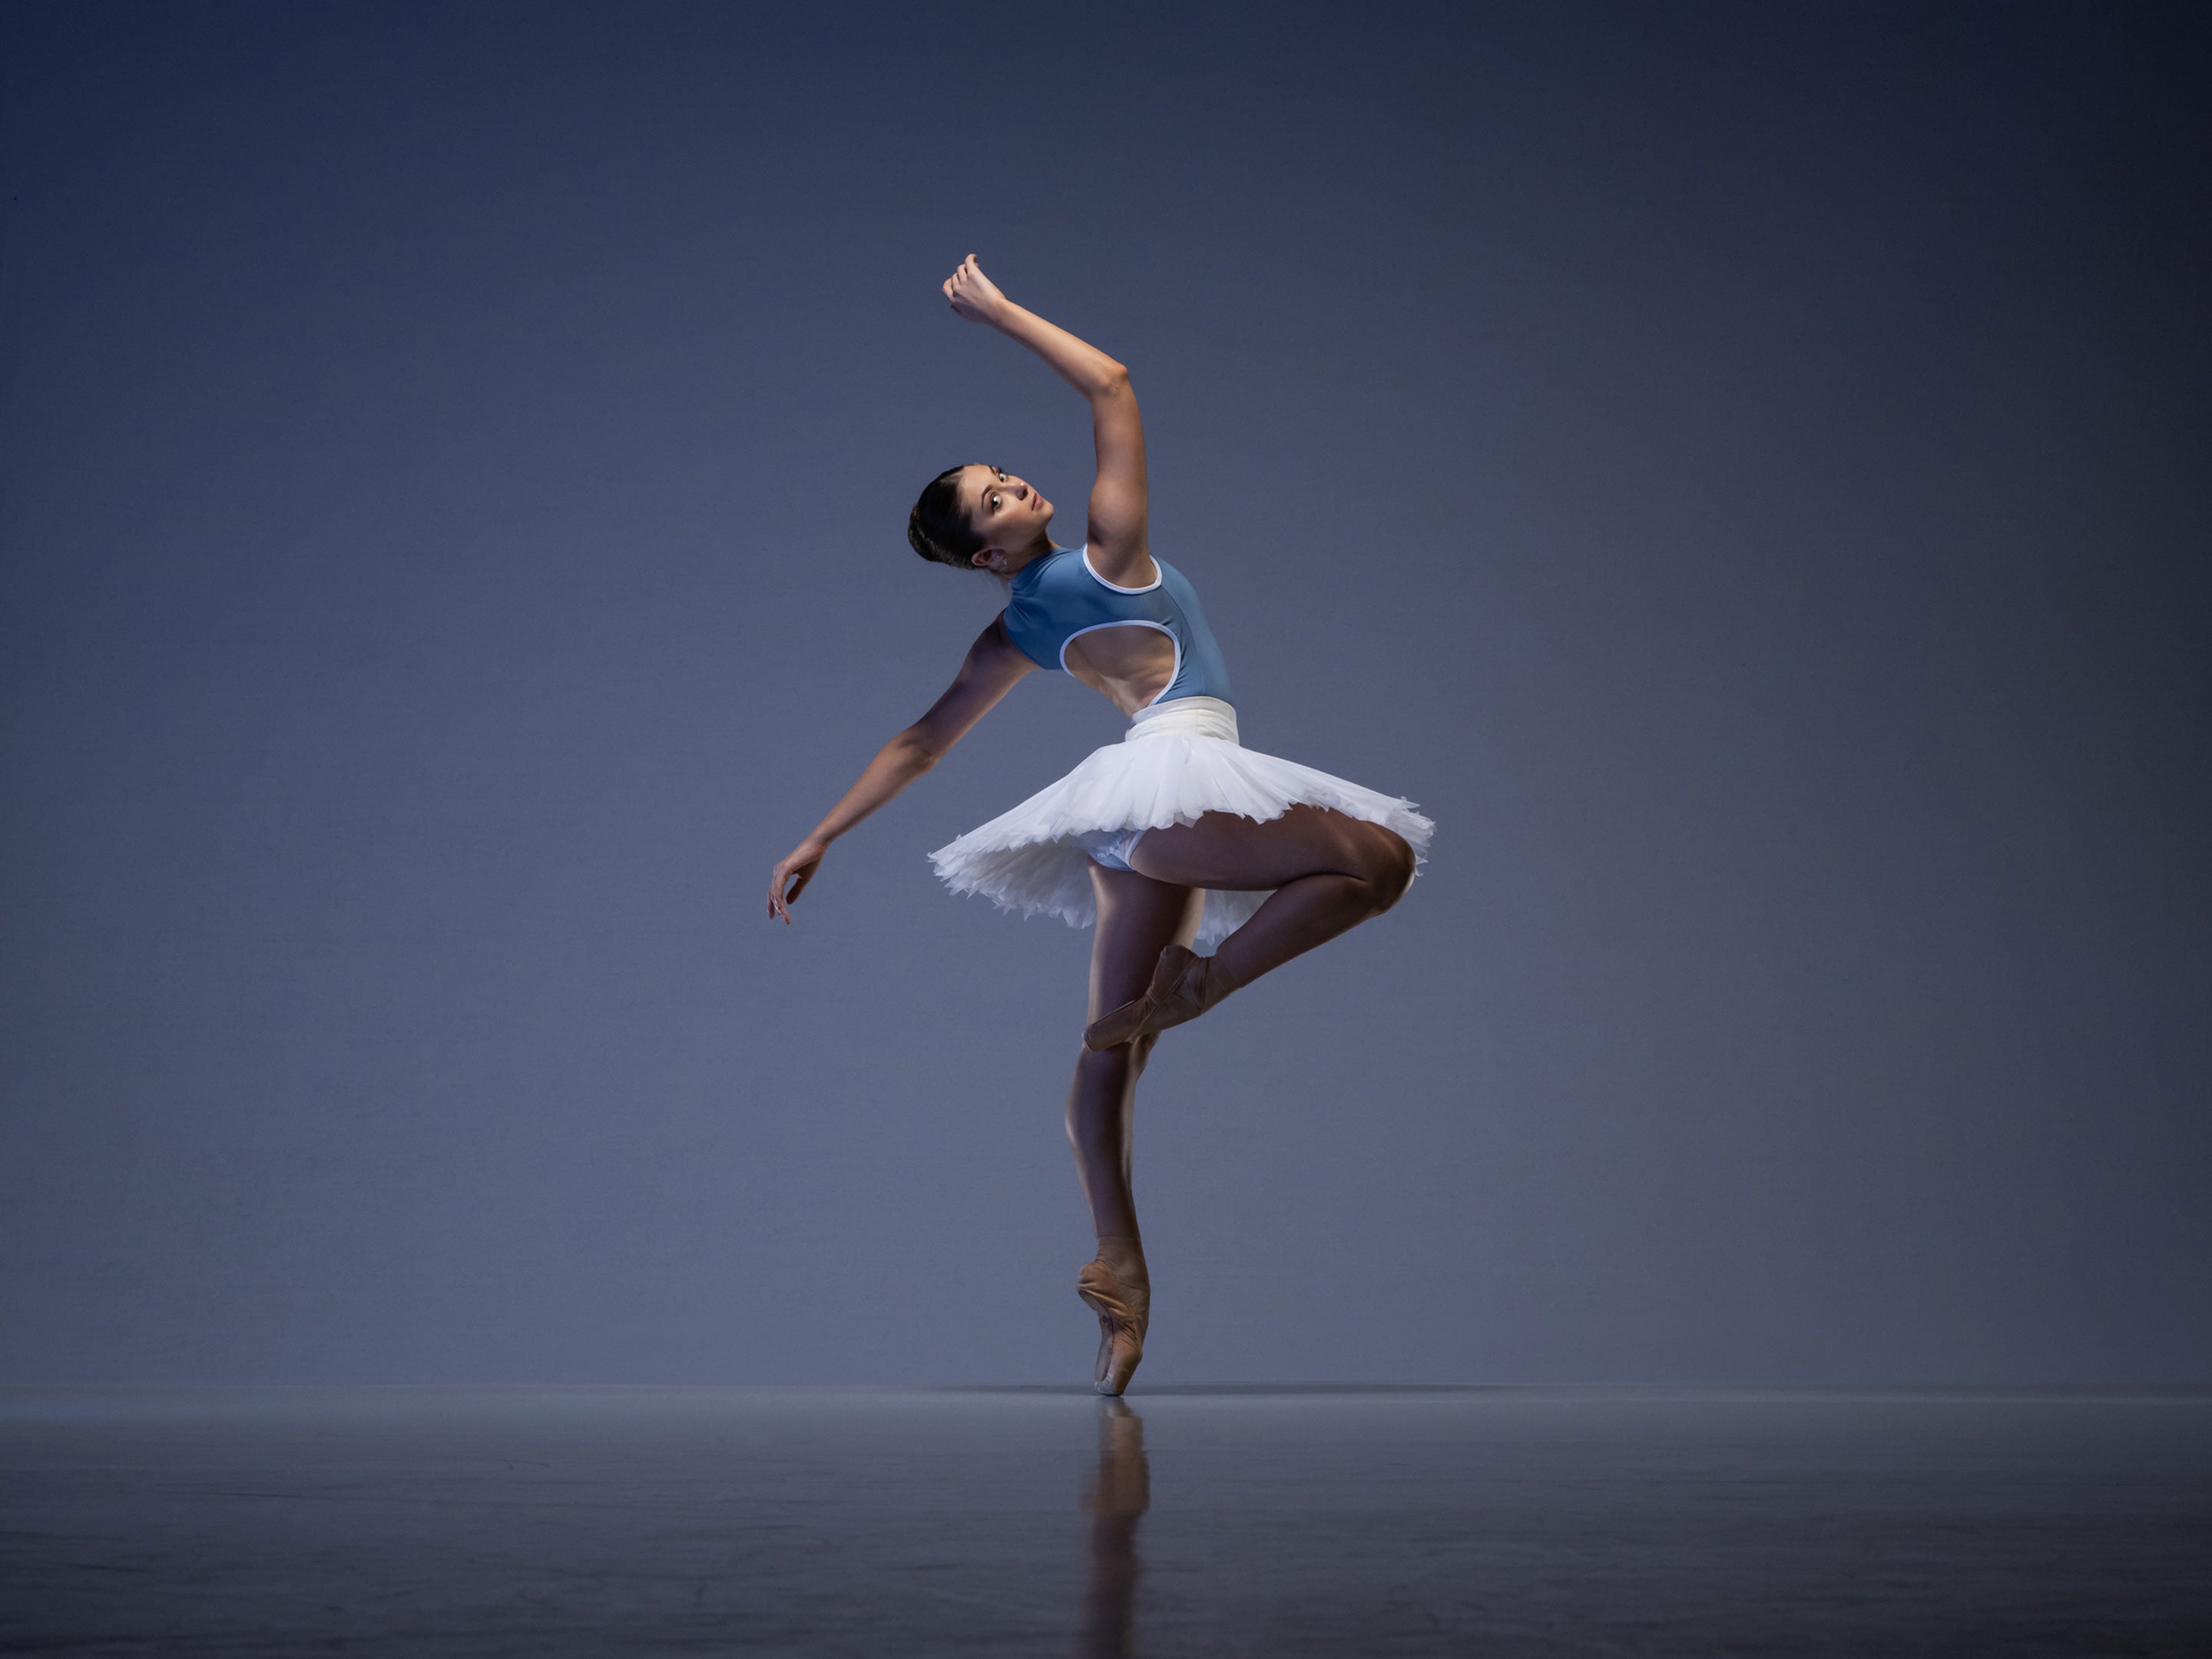 Inspiring young ballet dancers: An interview with Tia Wenkman